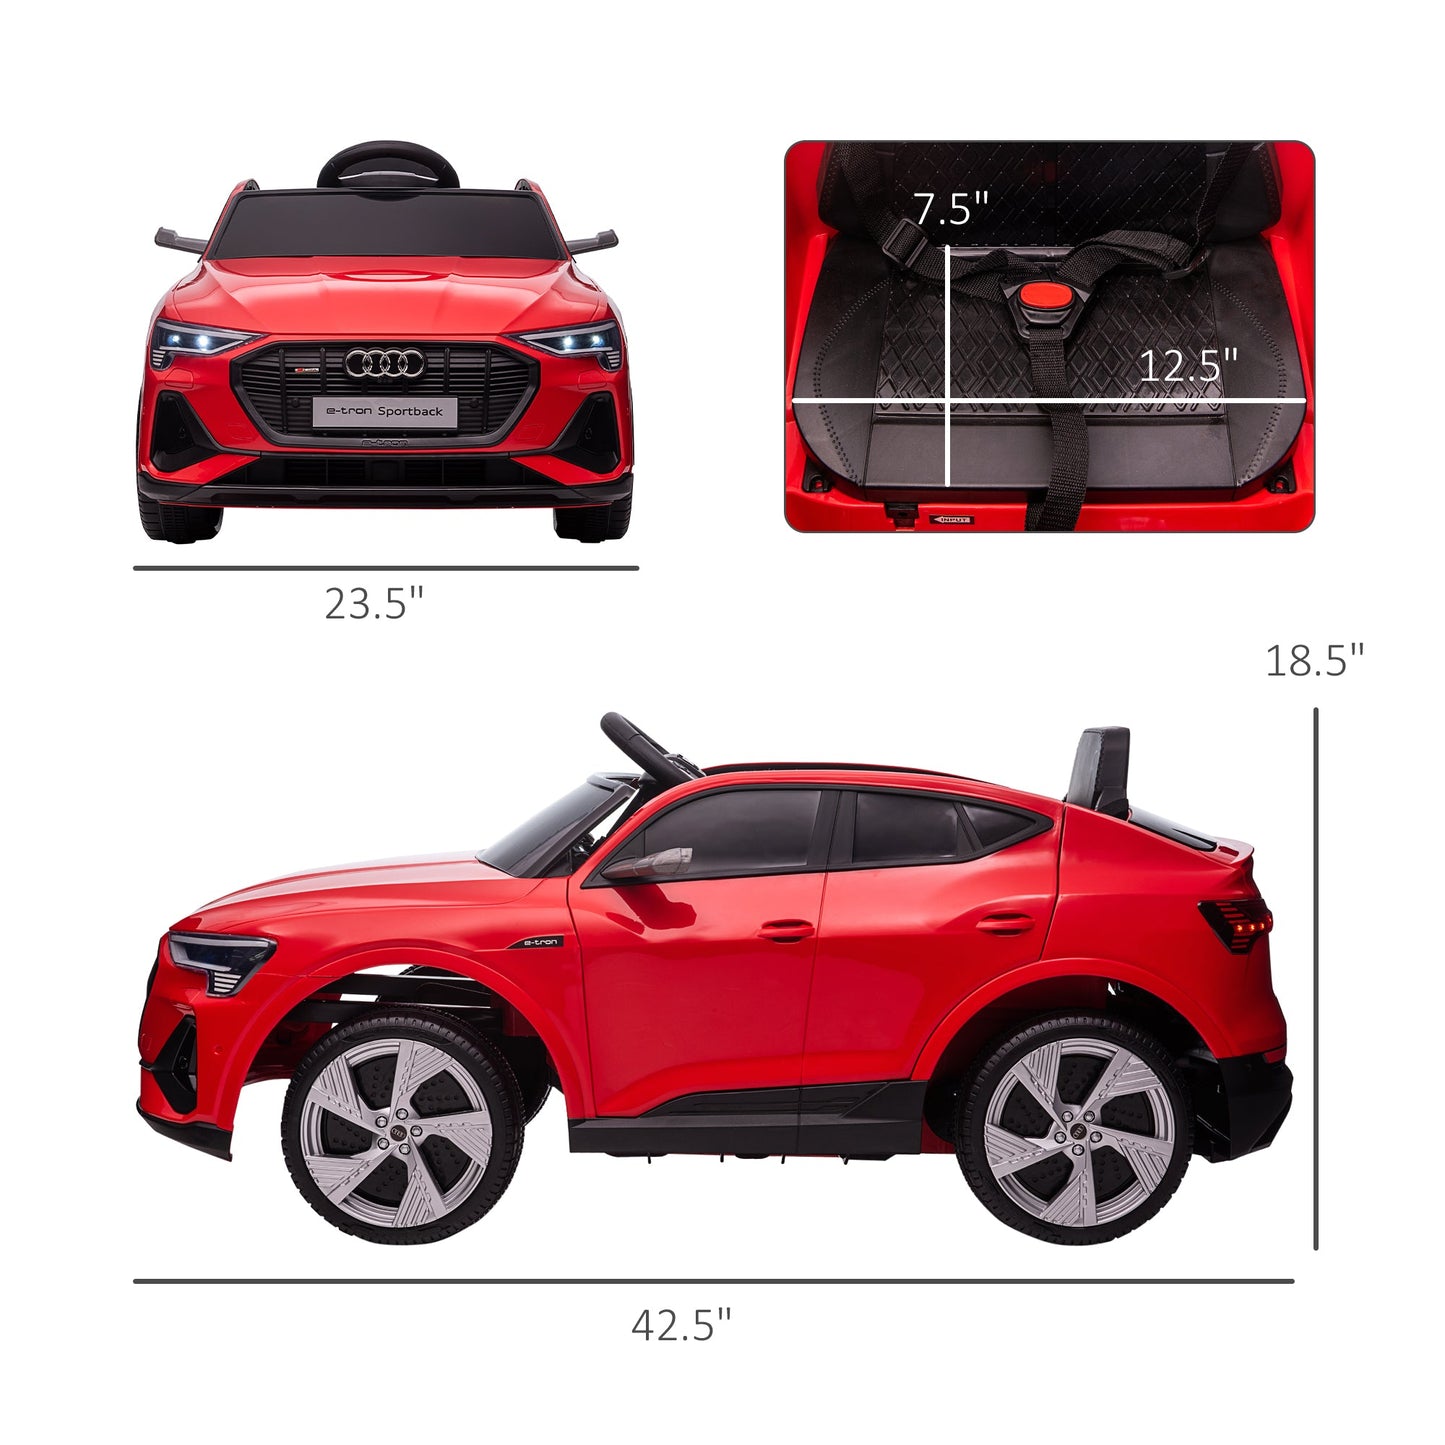 Toys and Games-12V Kids Electric Ride On Audi Sports Car, Battery Powered Toy w/ Remote Control, Safety Belt, LED Lights, Music & Horn for Children, Red - Outdoor Style Company